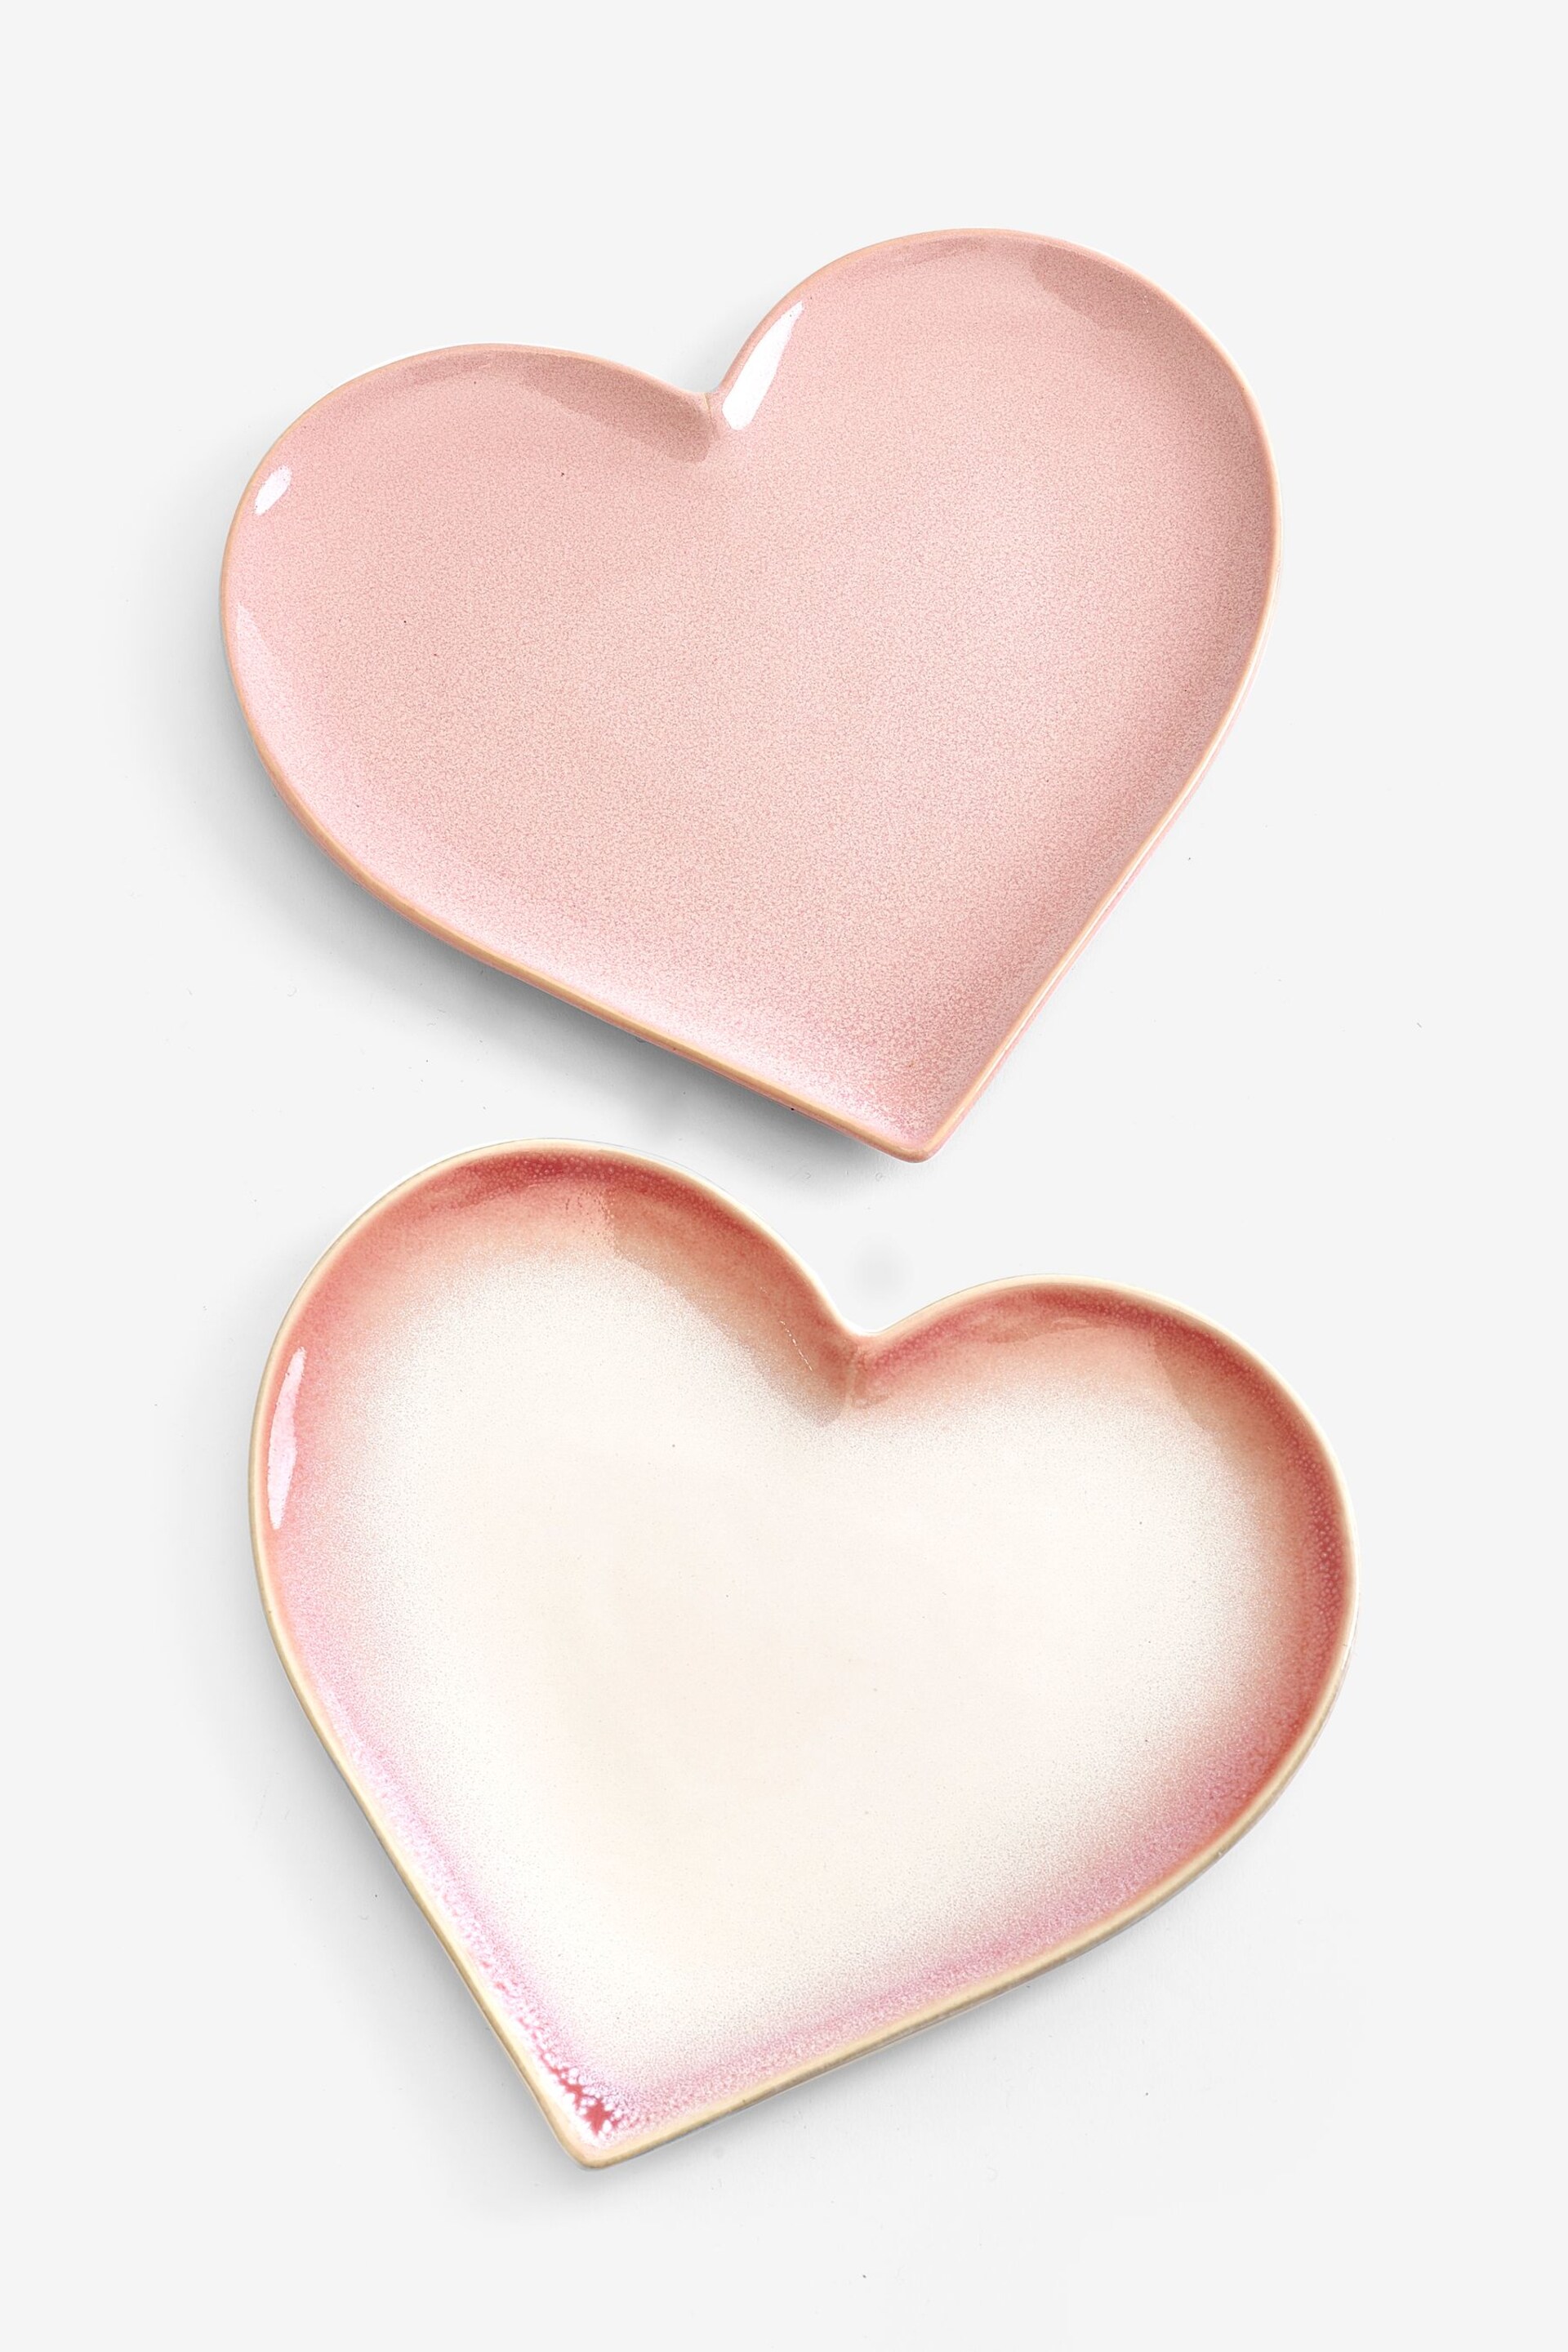 Set of 2 Pink Heart Shaped Side Plates - Image 3 of 3